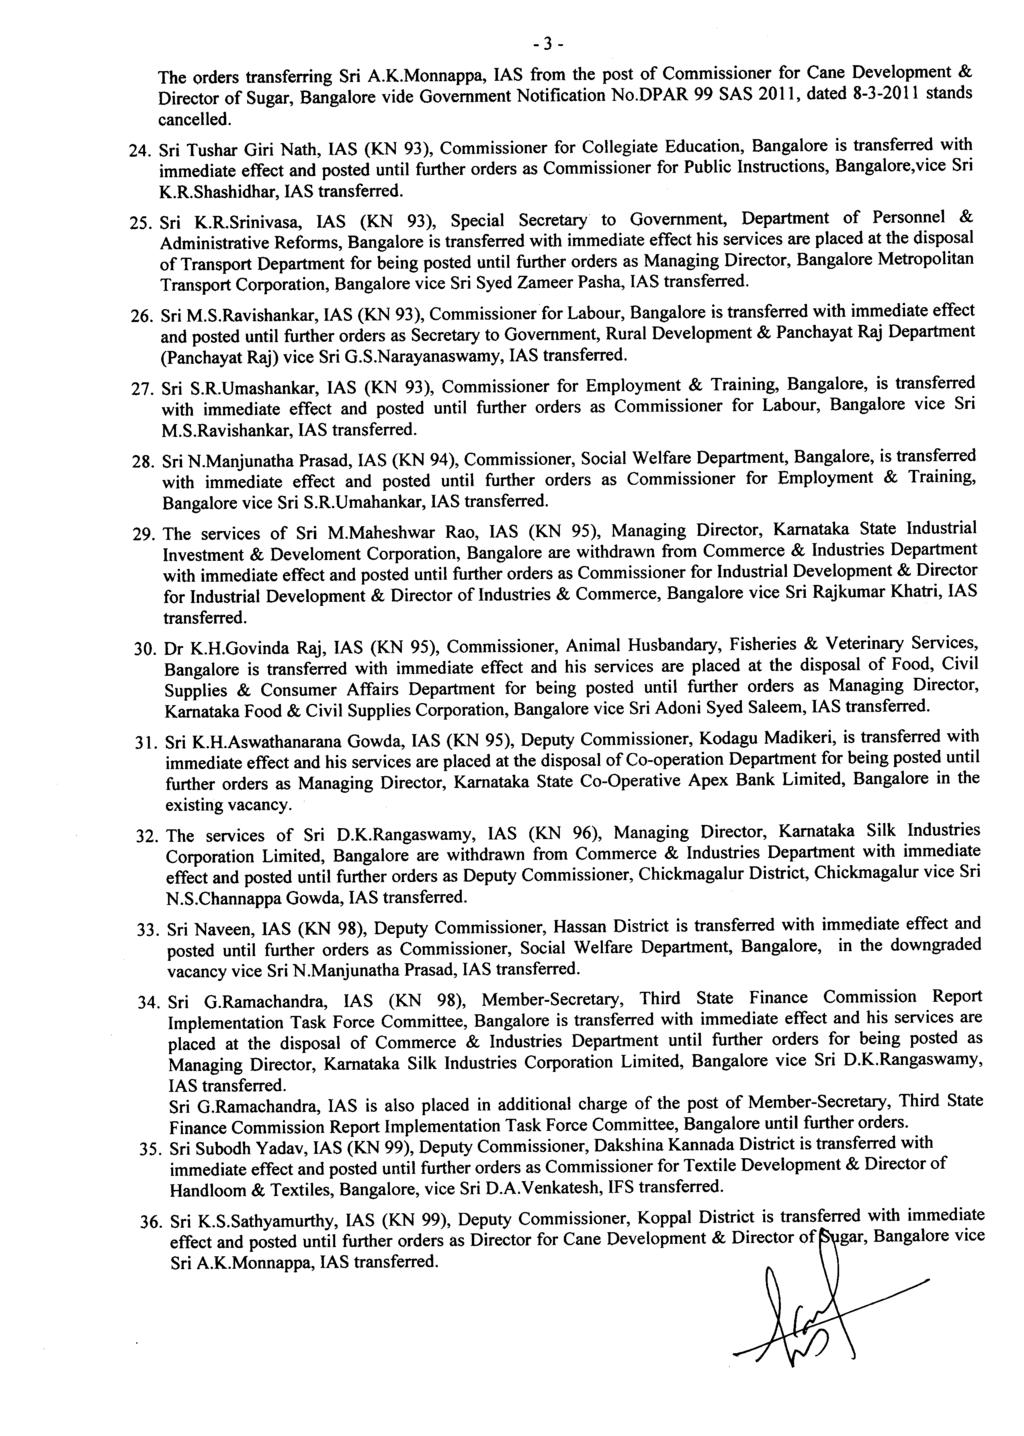 The orders transferring Sri A.K.Monnappa, IAS from the post of Commissioner for Cane Development & Director of Sugar, Bangalore vide Government Notification No.